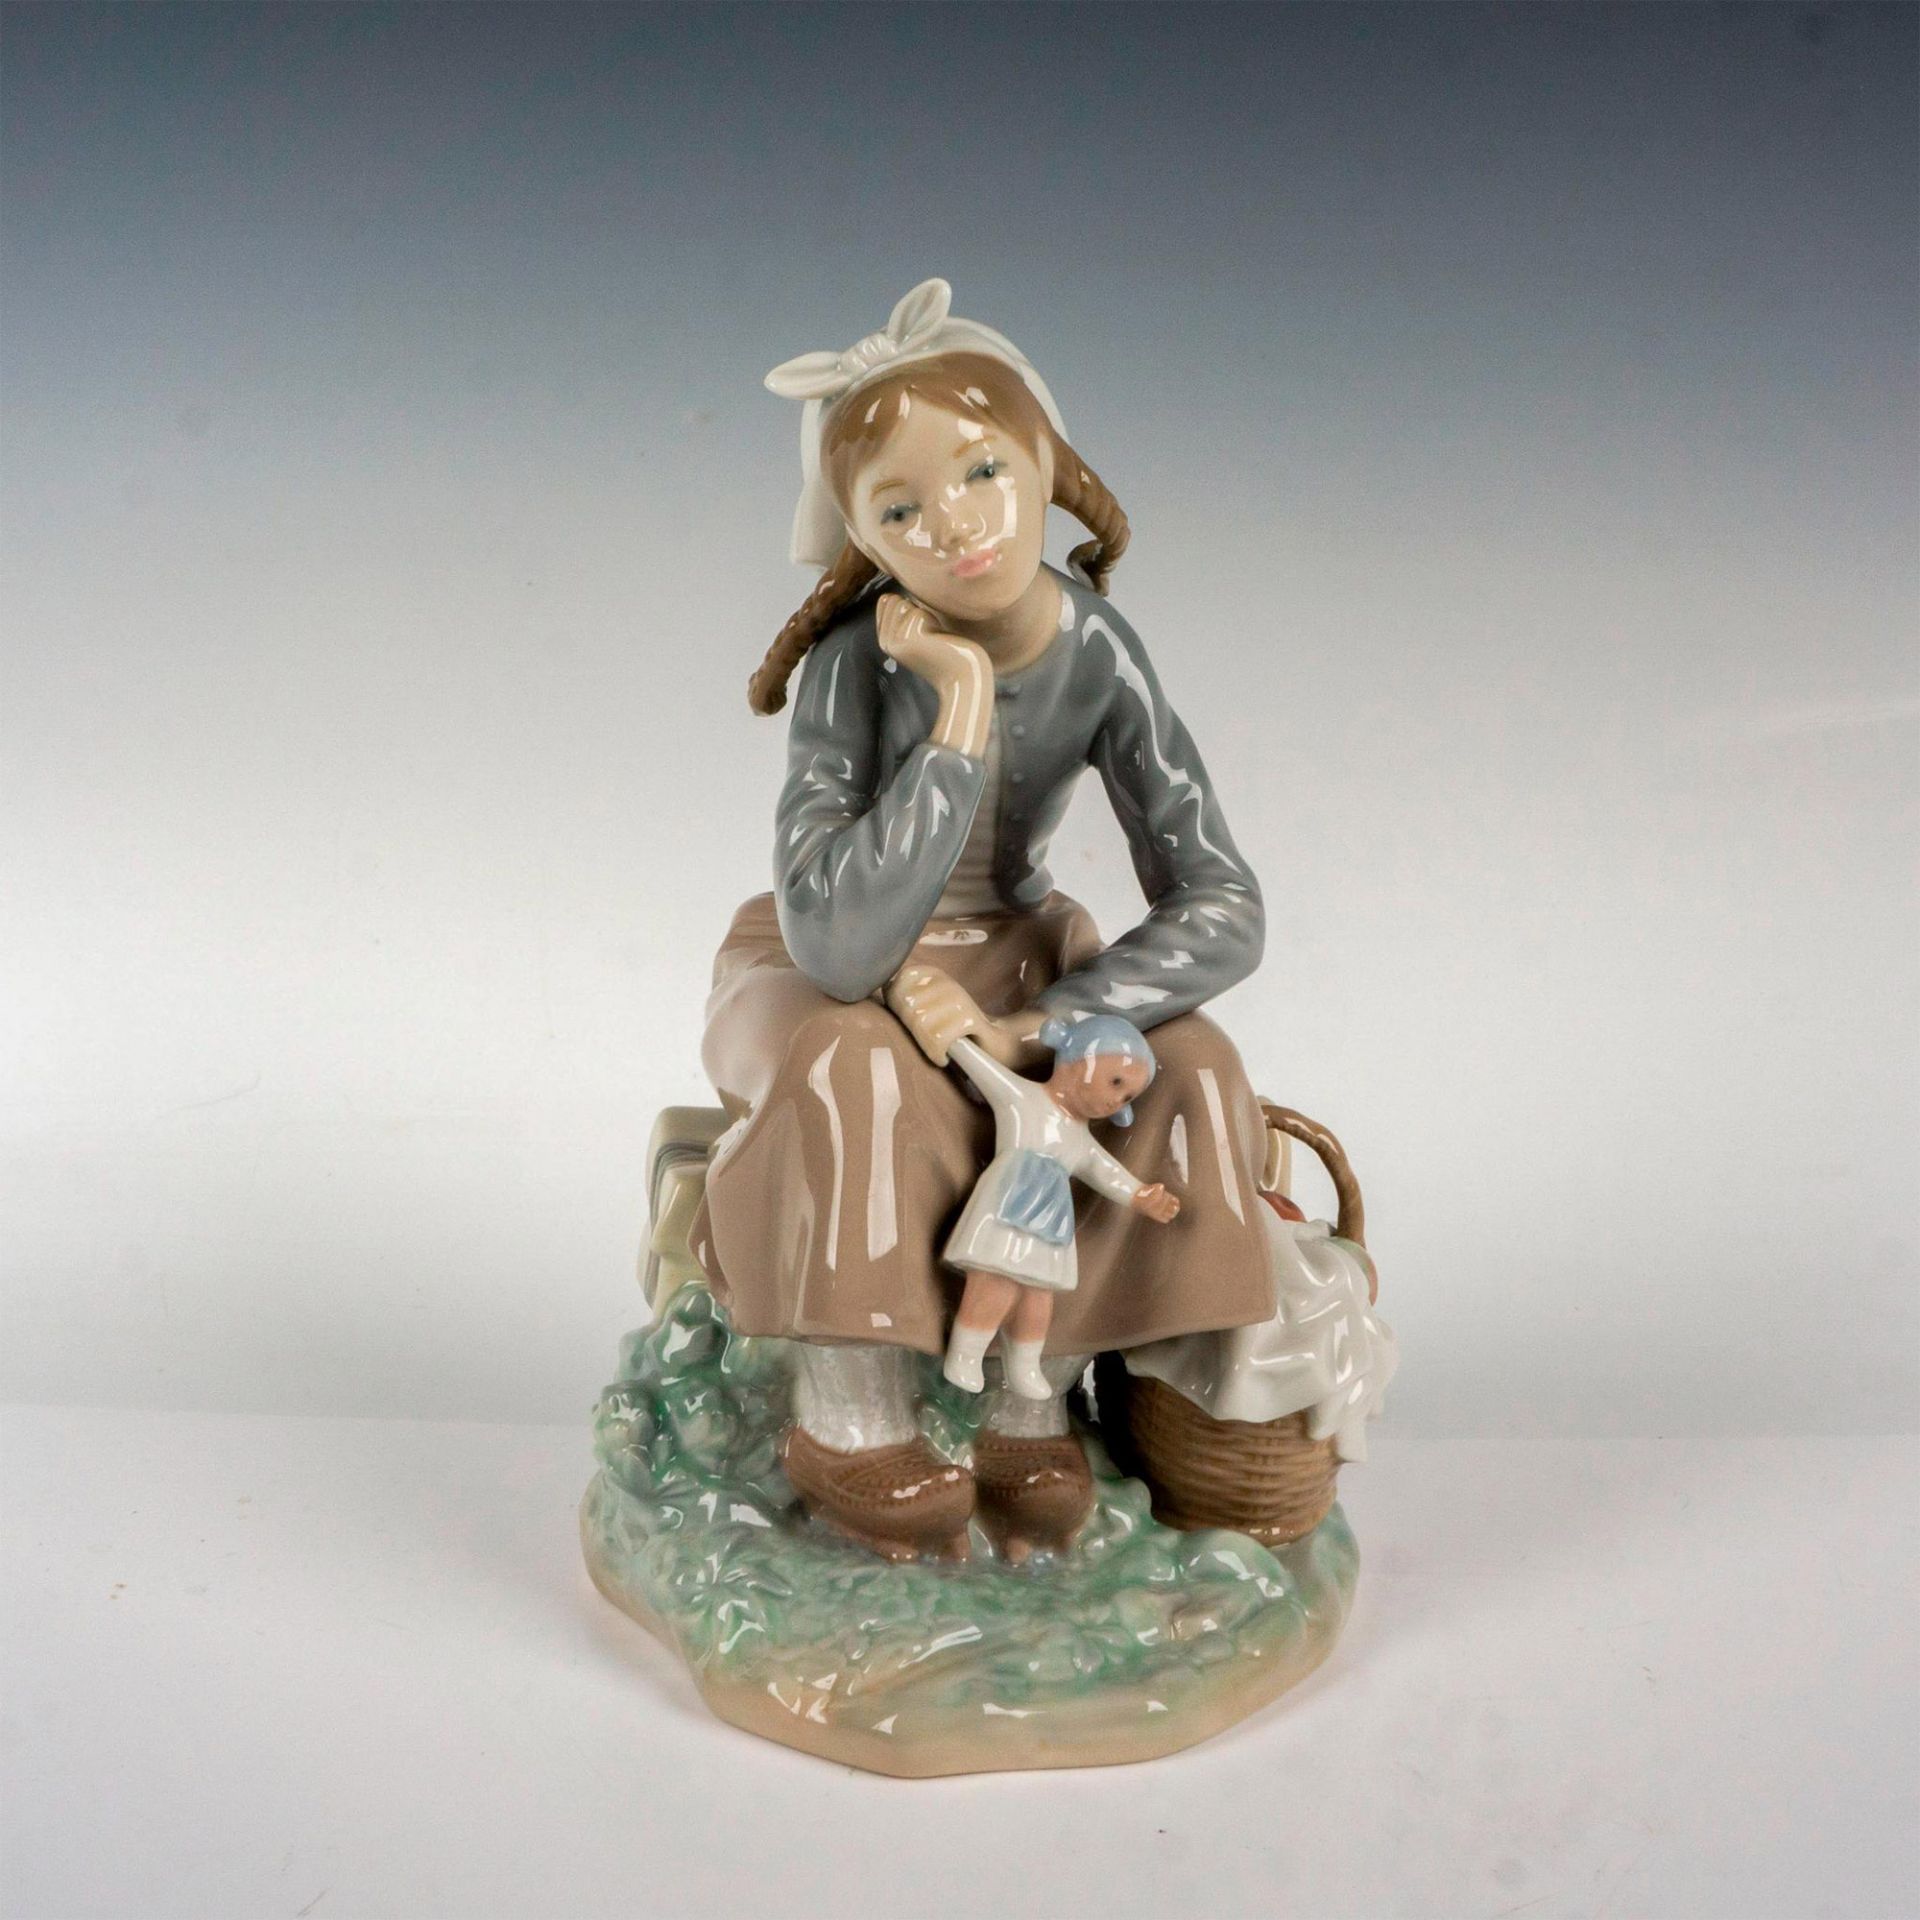 Girl With Doll 1001211 - Lladro Porcelain Figurine